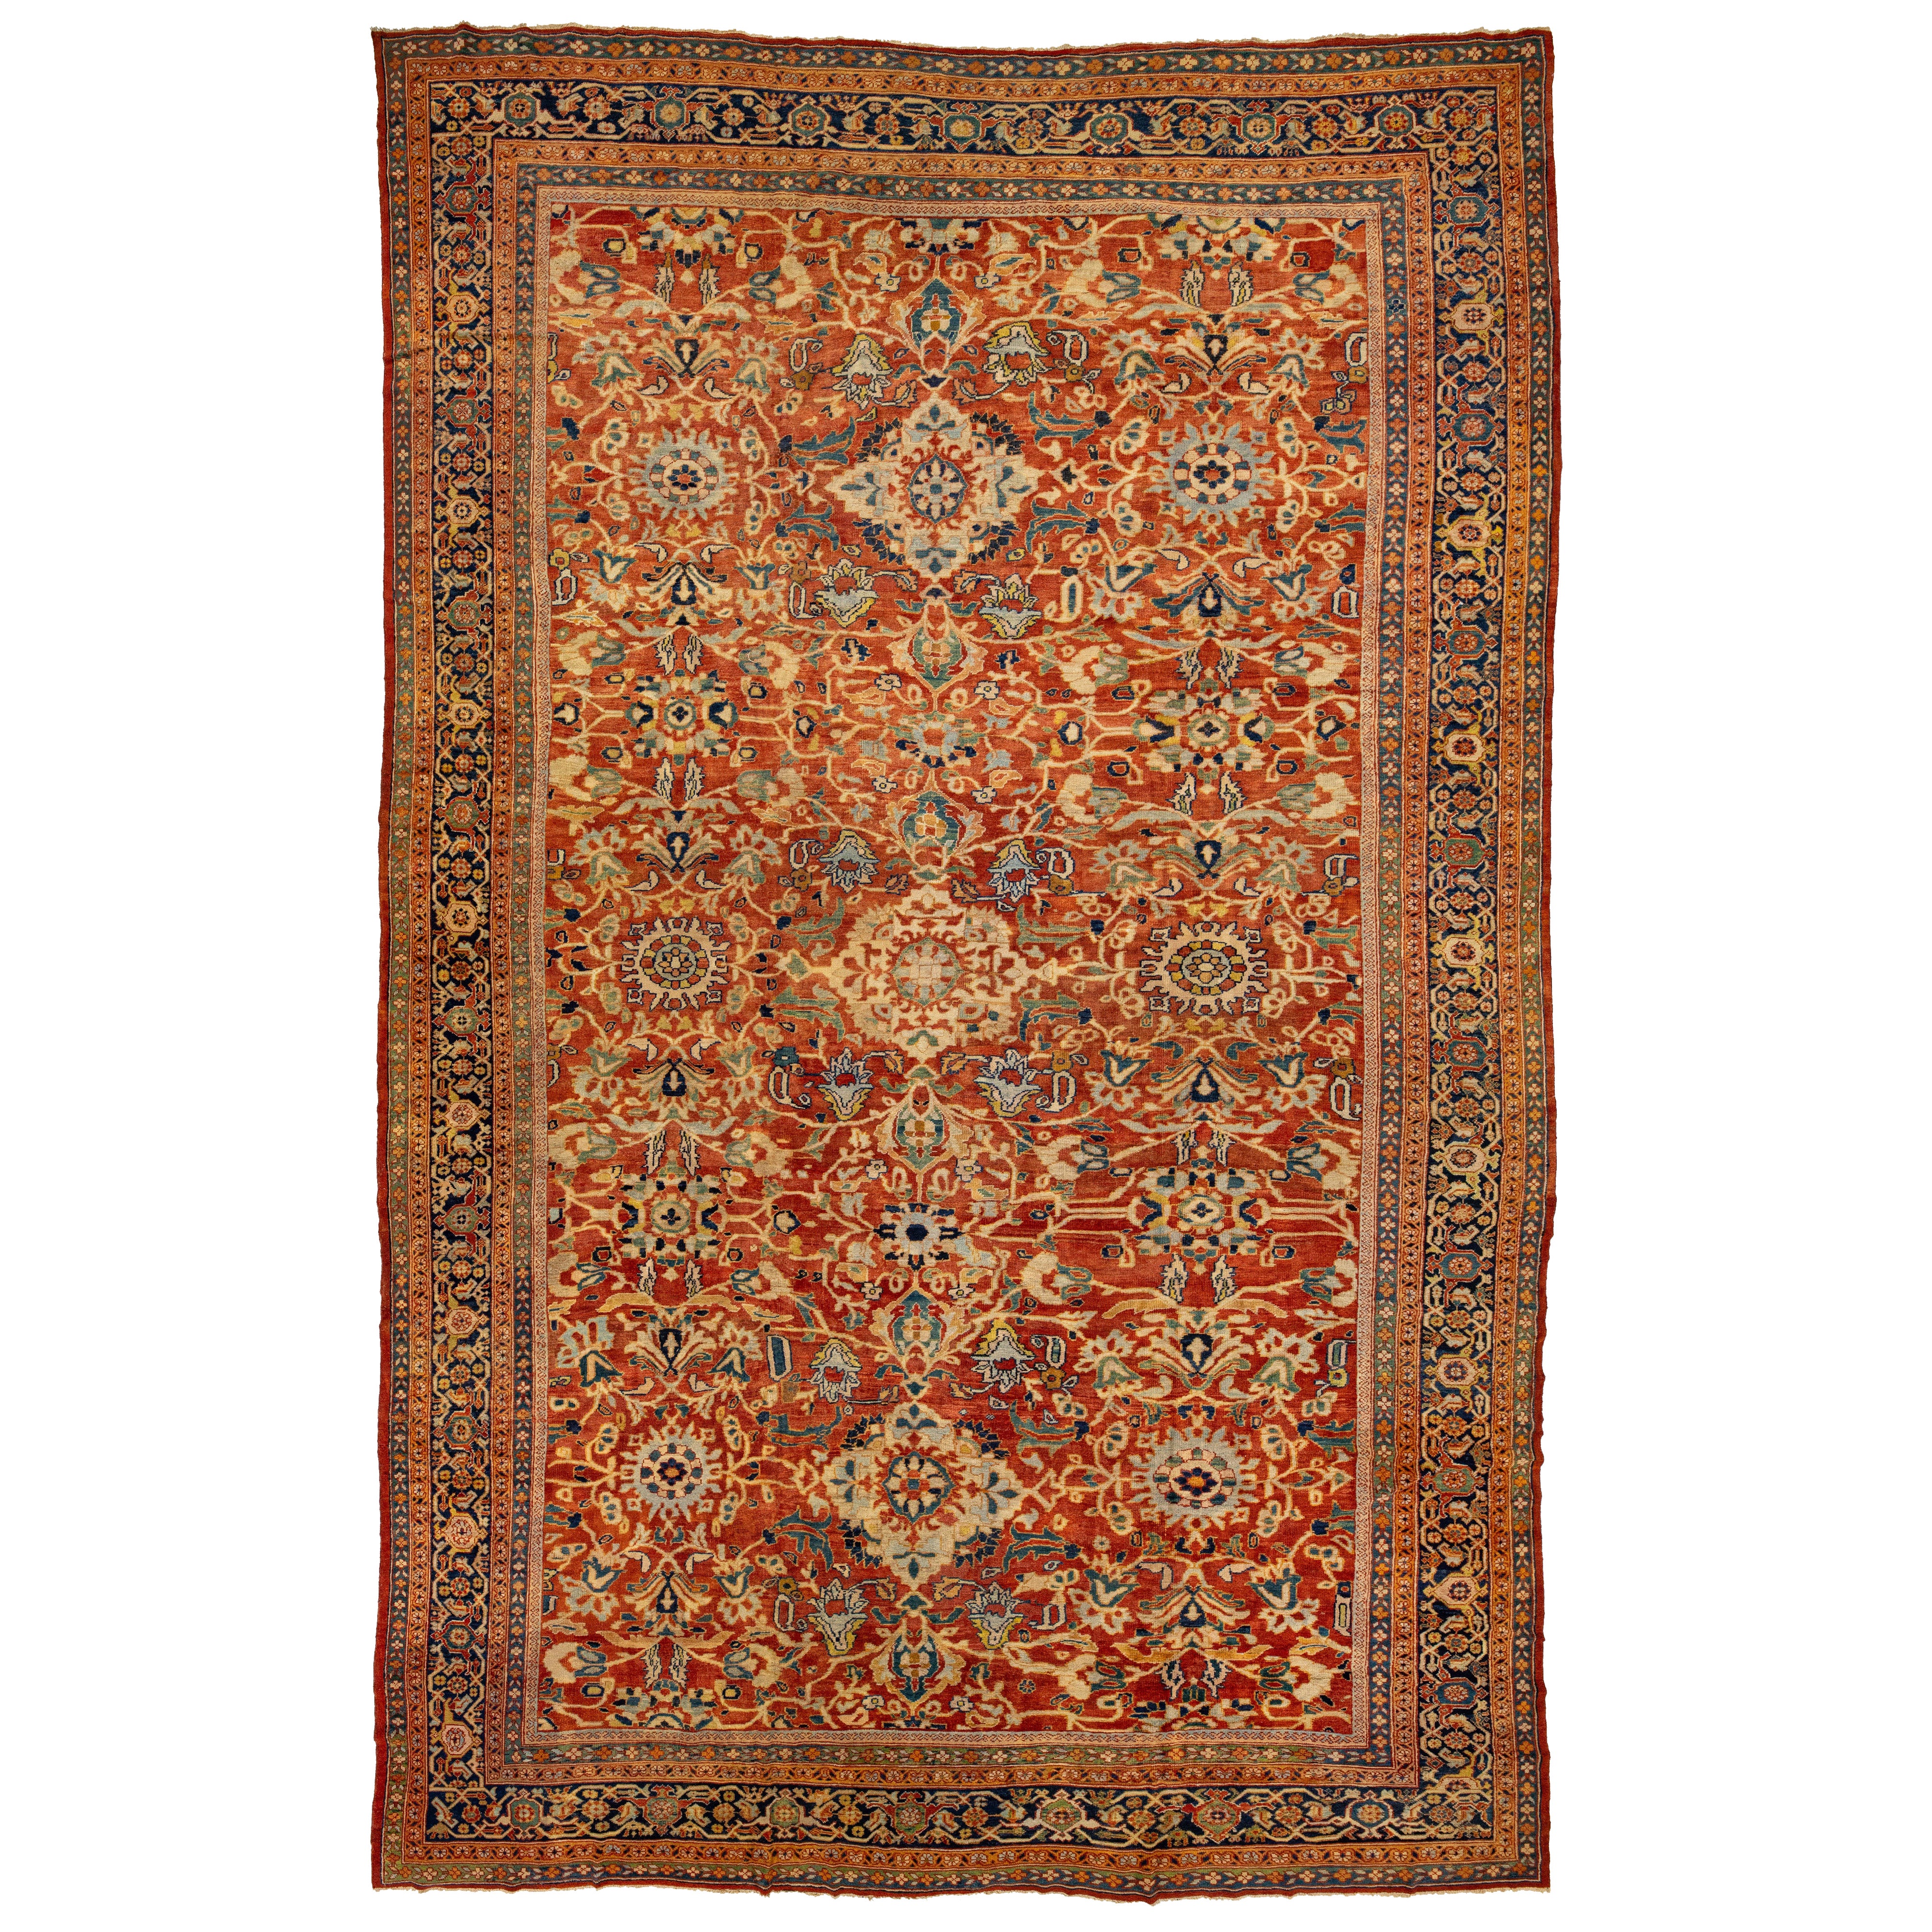 One of a Kind 1880's Antique Persian Sultanabad Allover Wool Rug In Rust Color  For Sale